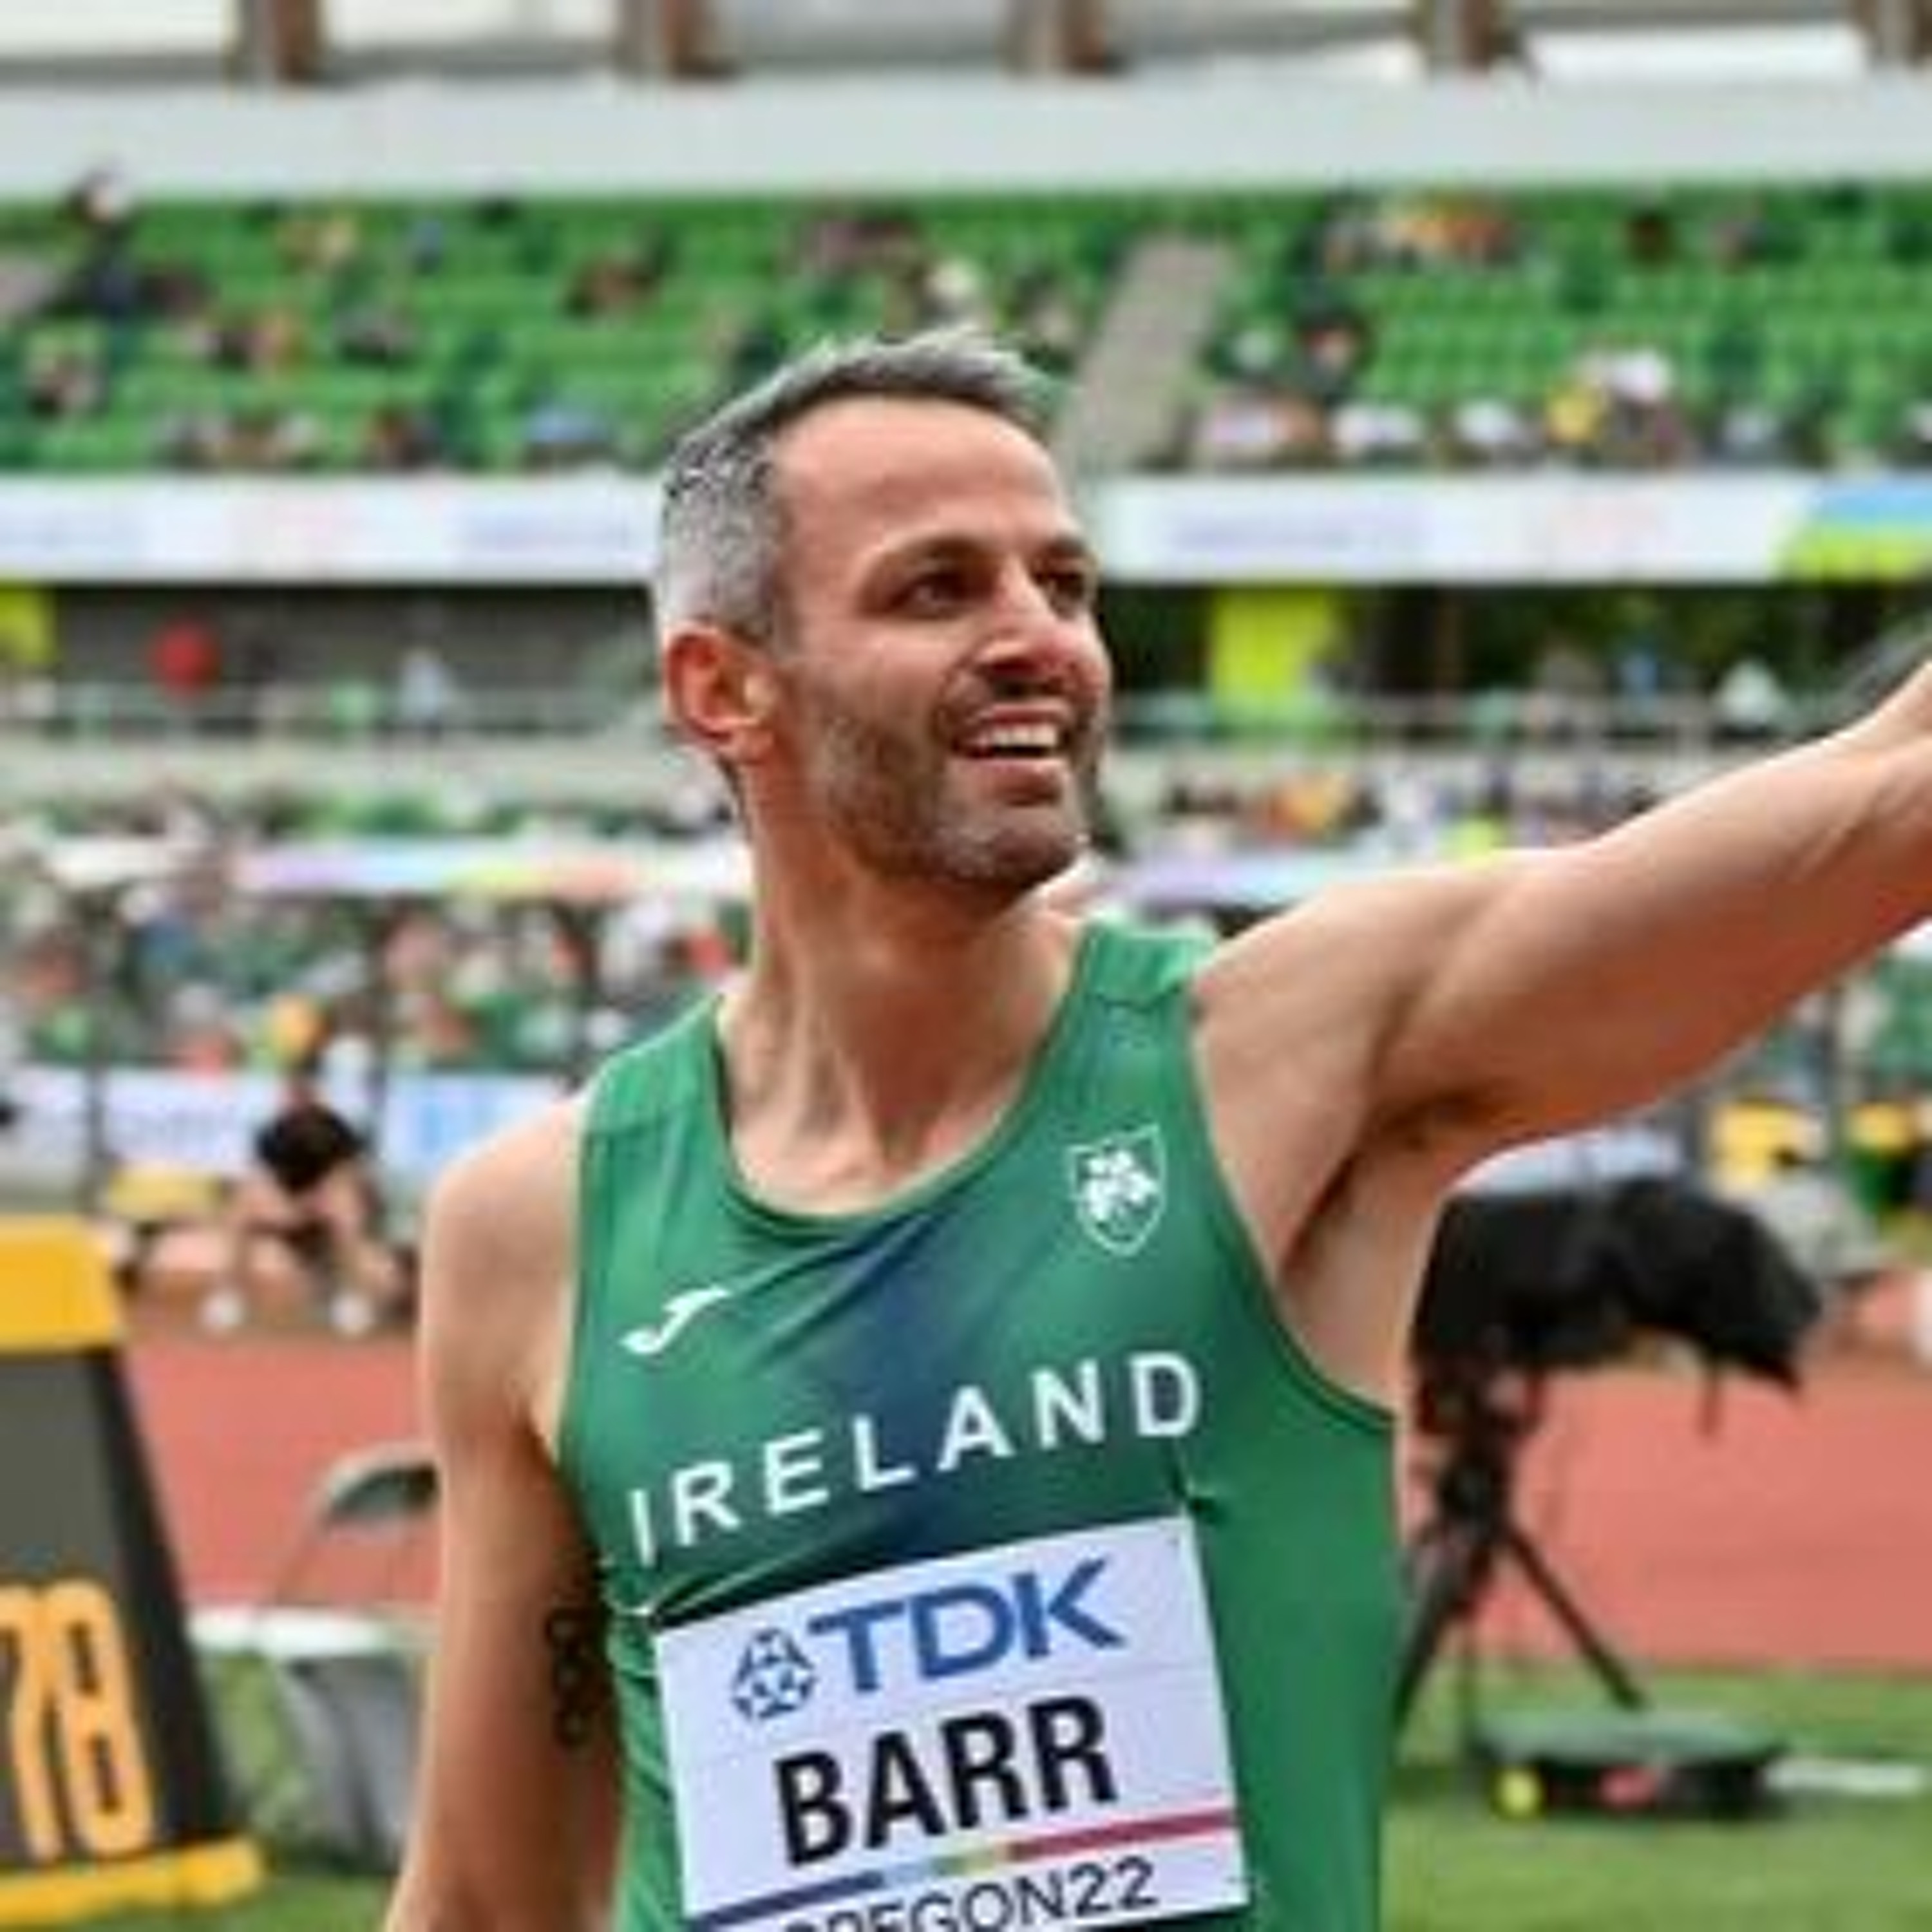 Euro Champs 2022 - WED 17/8 Thomas Barr